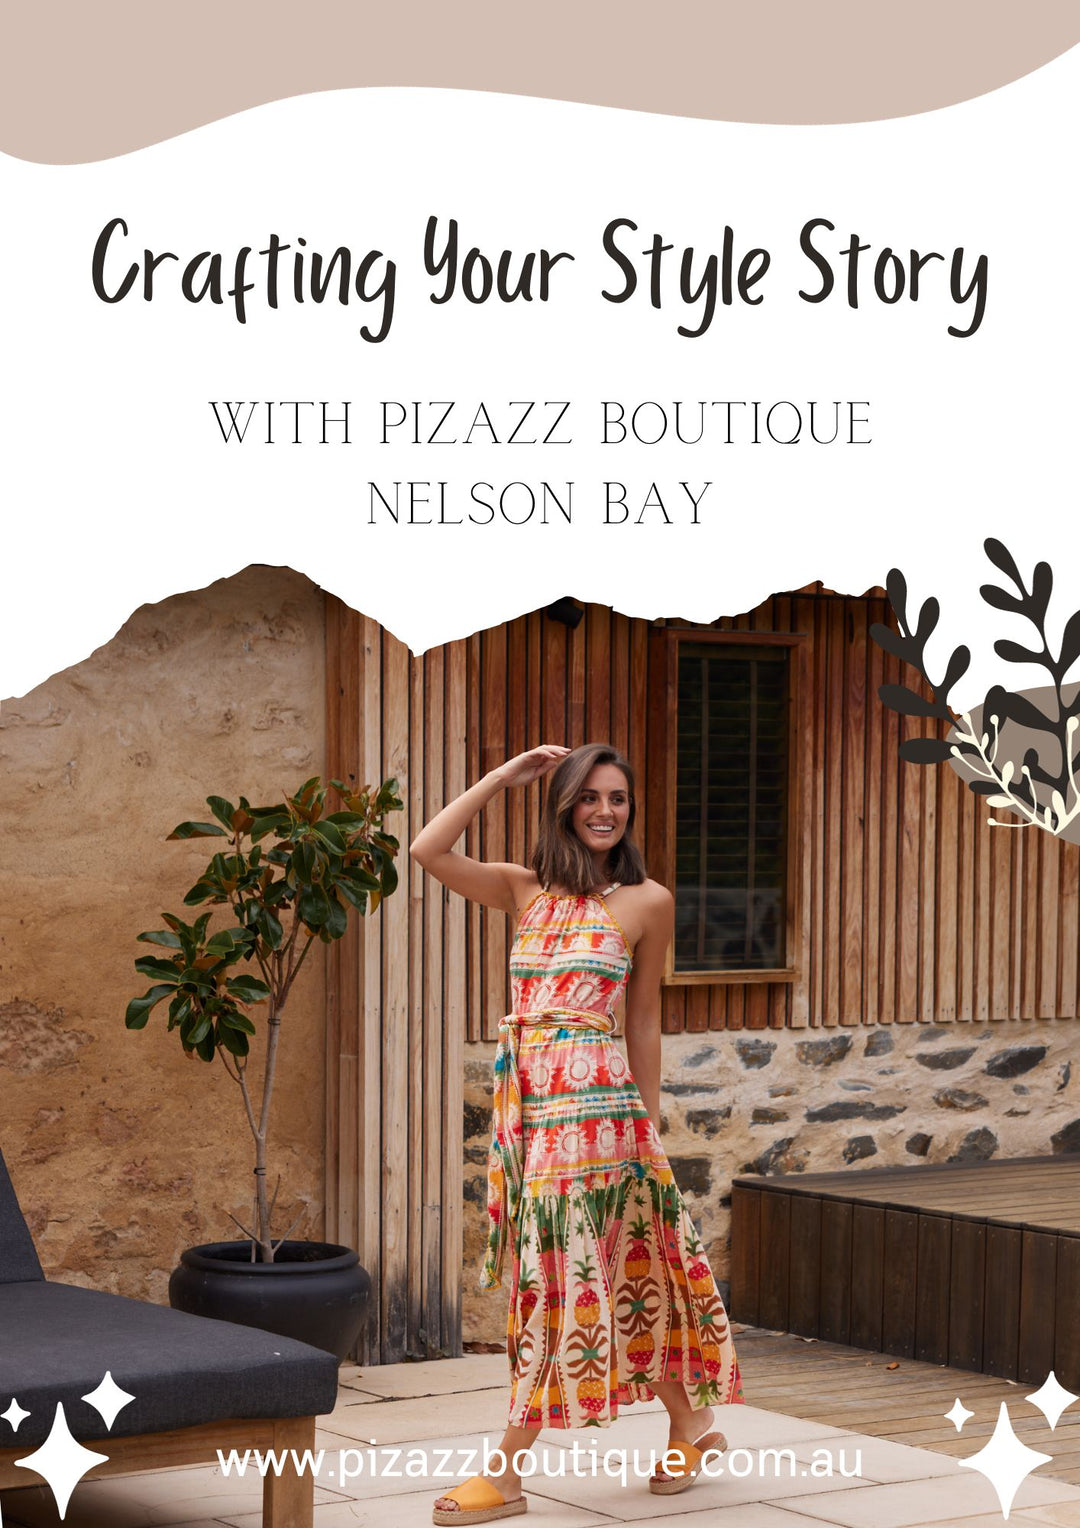 Crafting your style story with Pizazz Boutique Nelson Bay